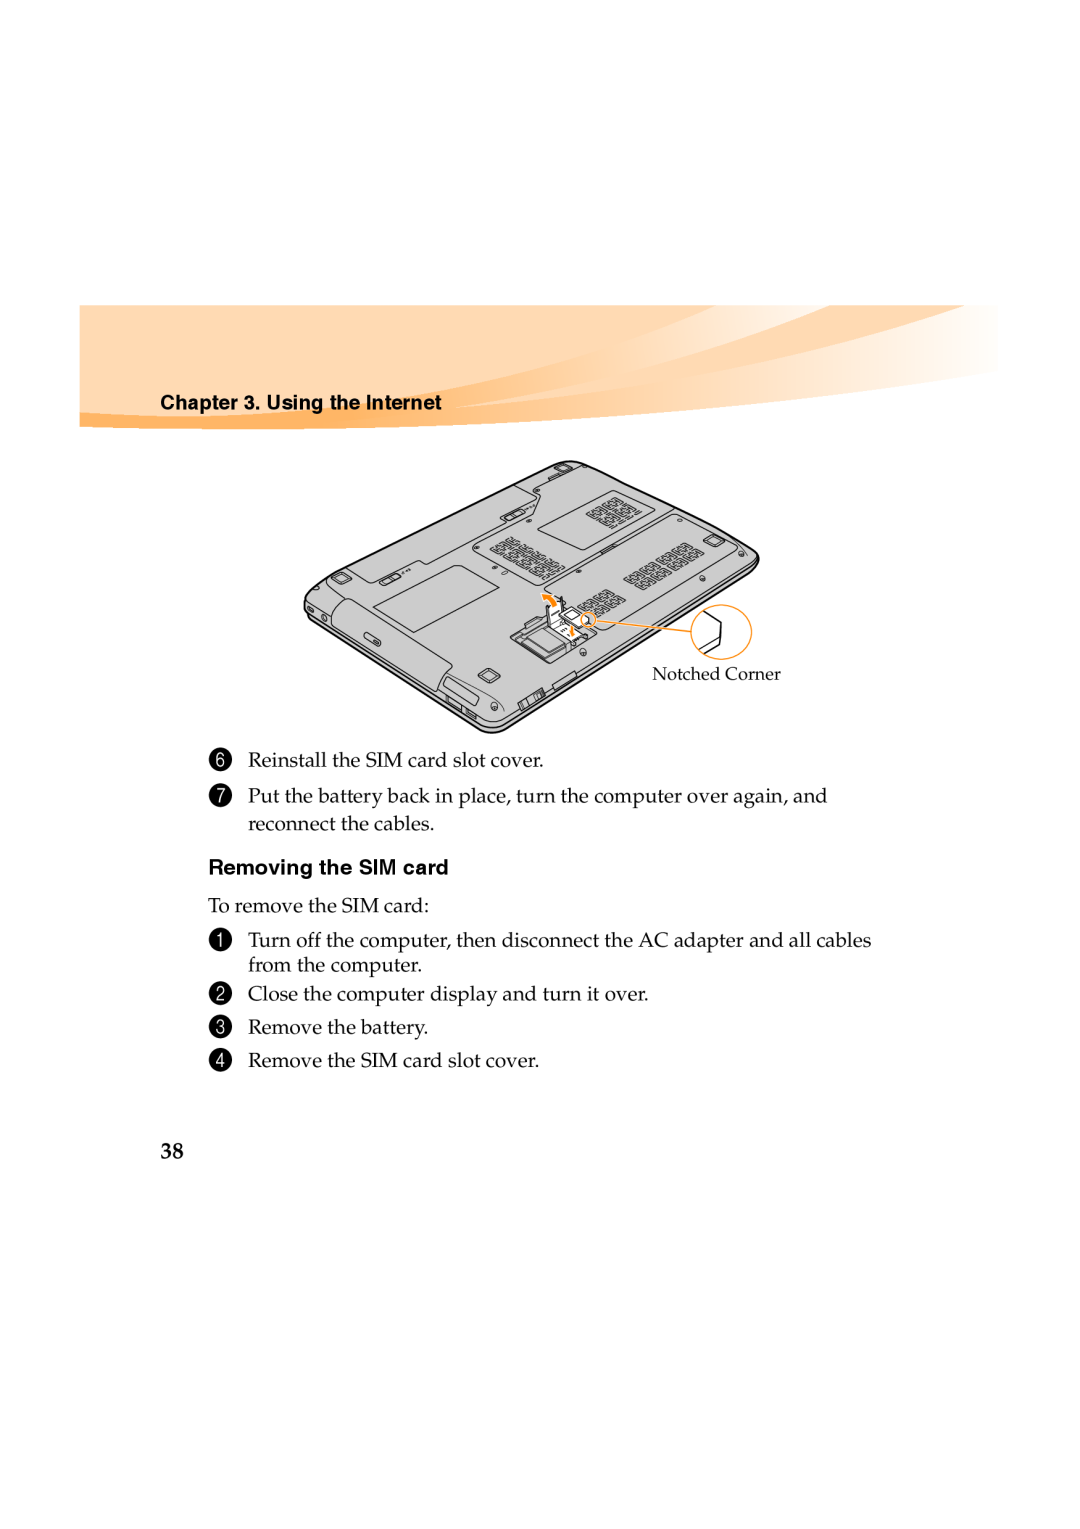 Lenovo Y460 manual Using the Internet, Removing the SIM card, Notched Corner 